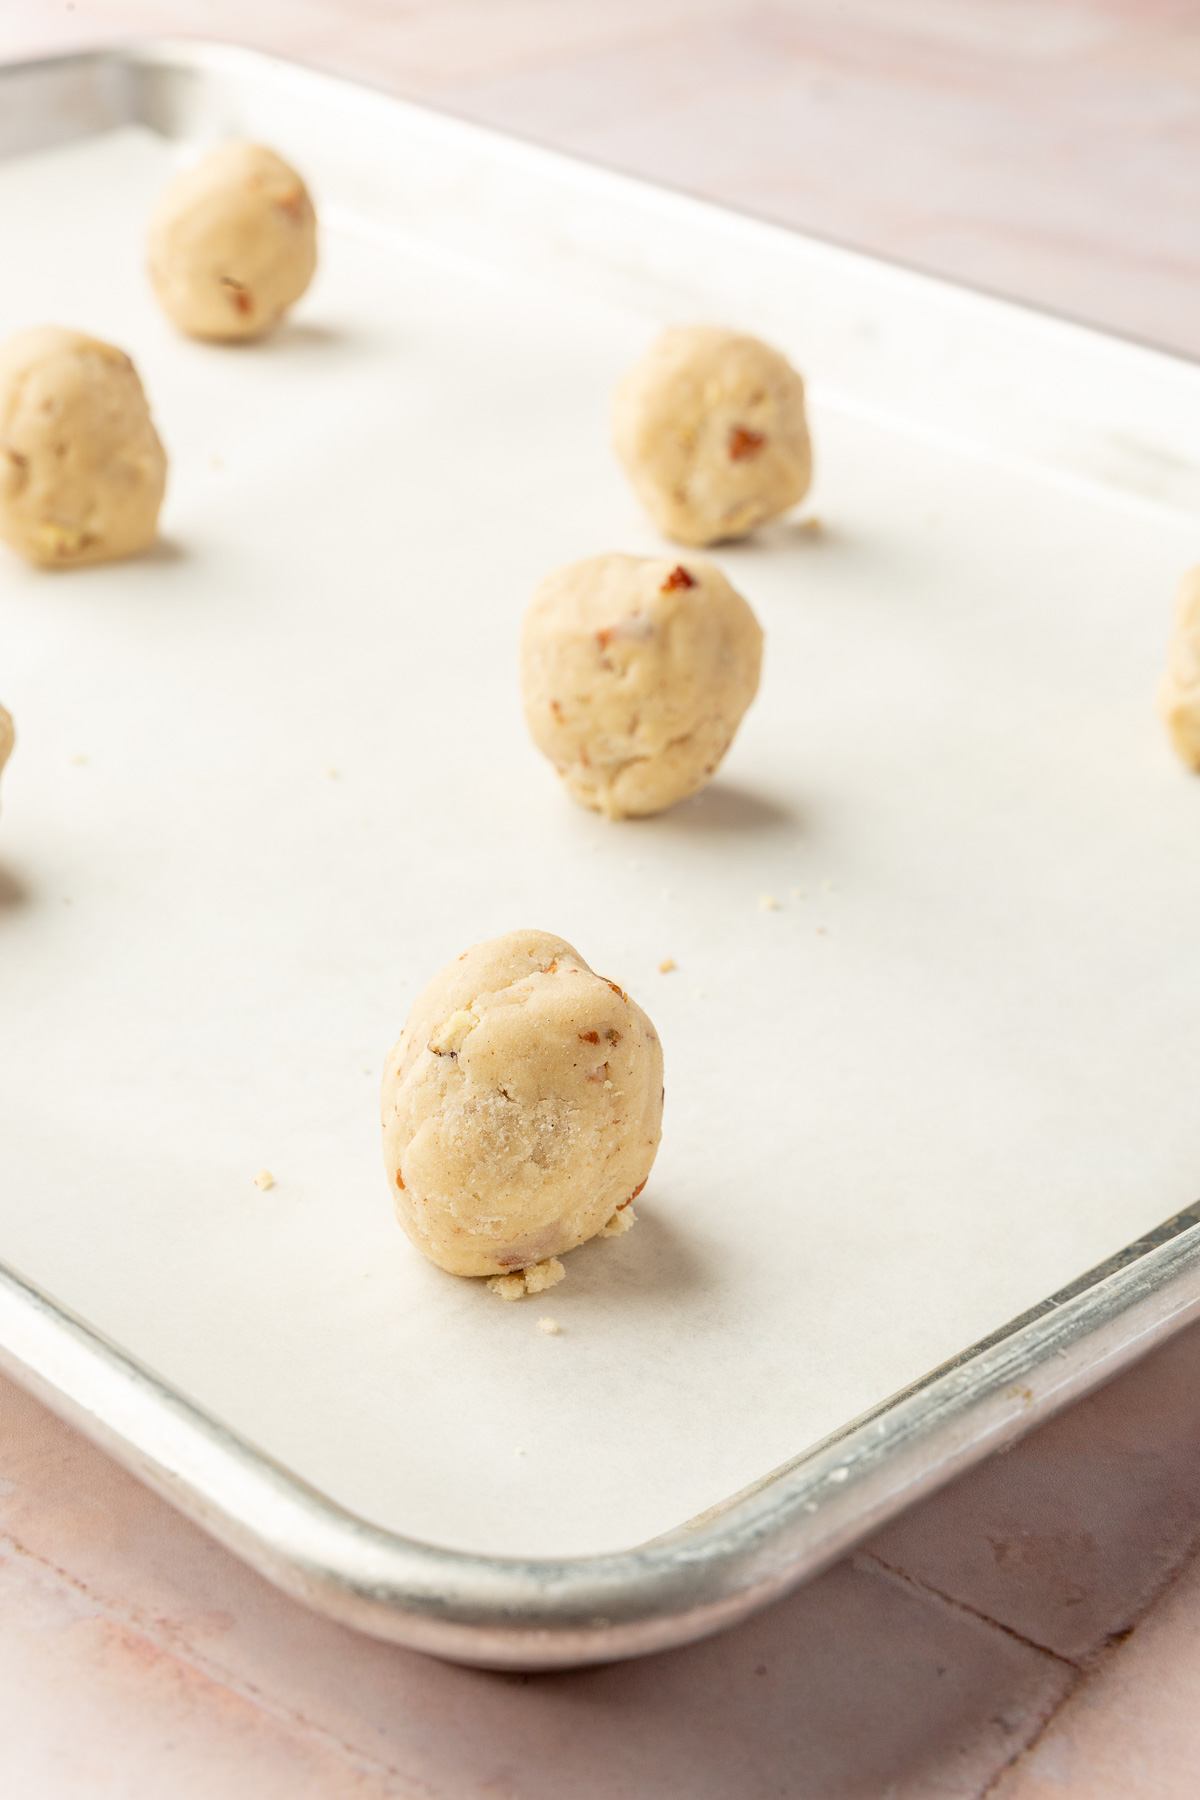 A baking sheet lined with parchment paper and topped with 9 gluten free snowball cookie dough balls before baking in the oven.